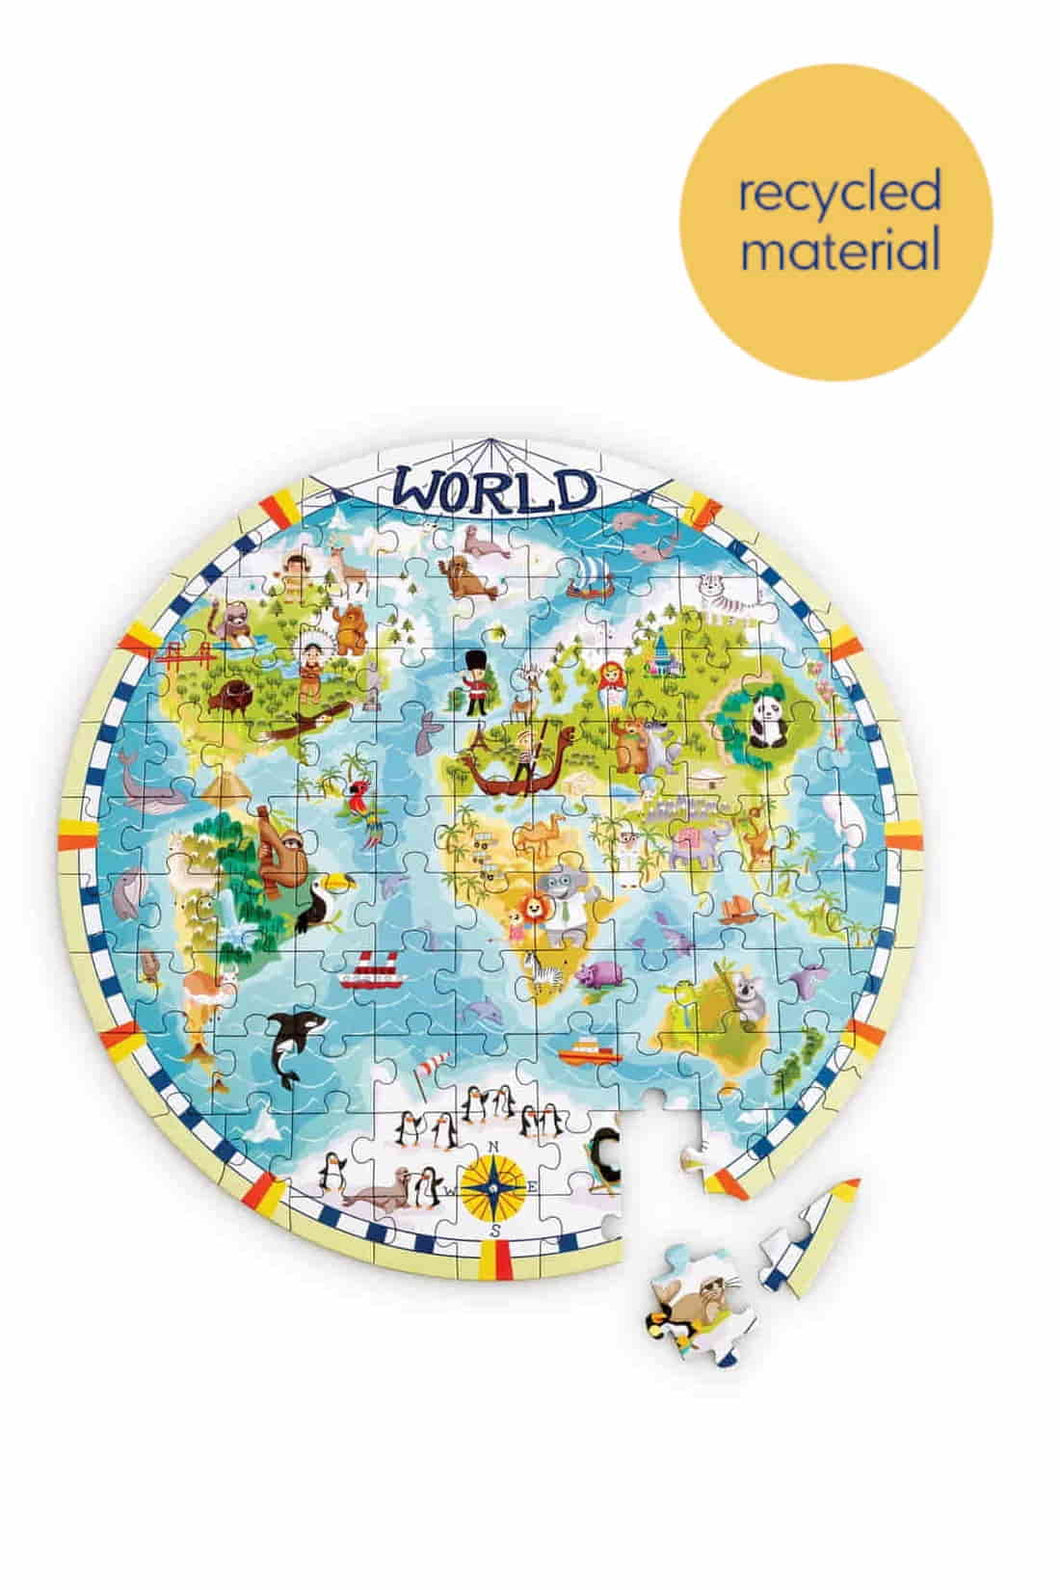 Early Learning Centre World Map 100 Piece Jigsaw Puzzle